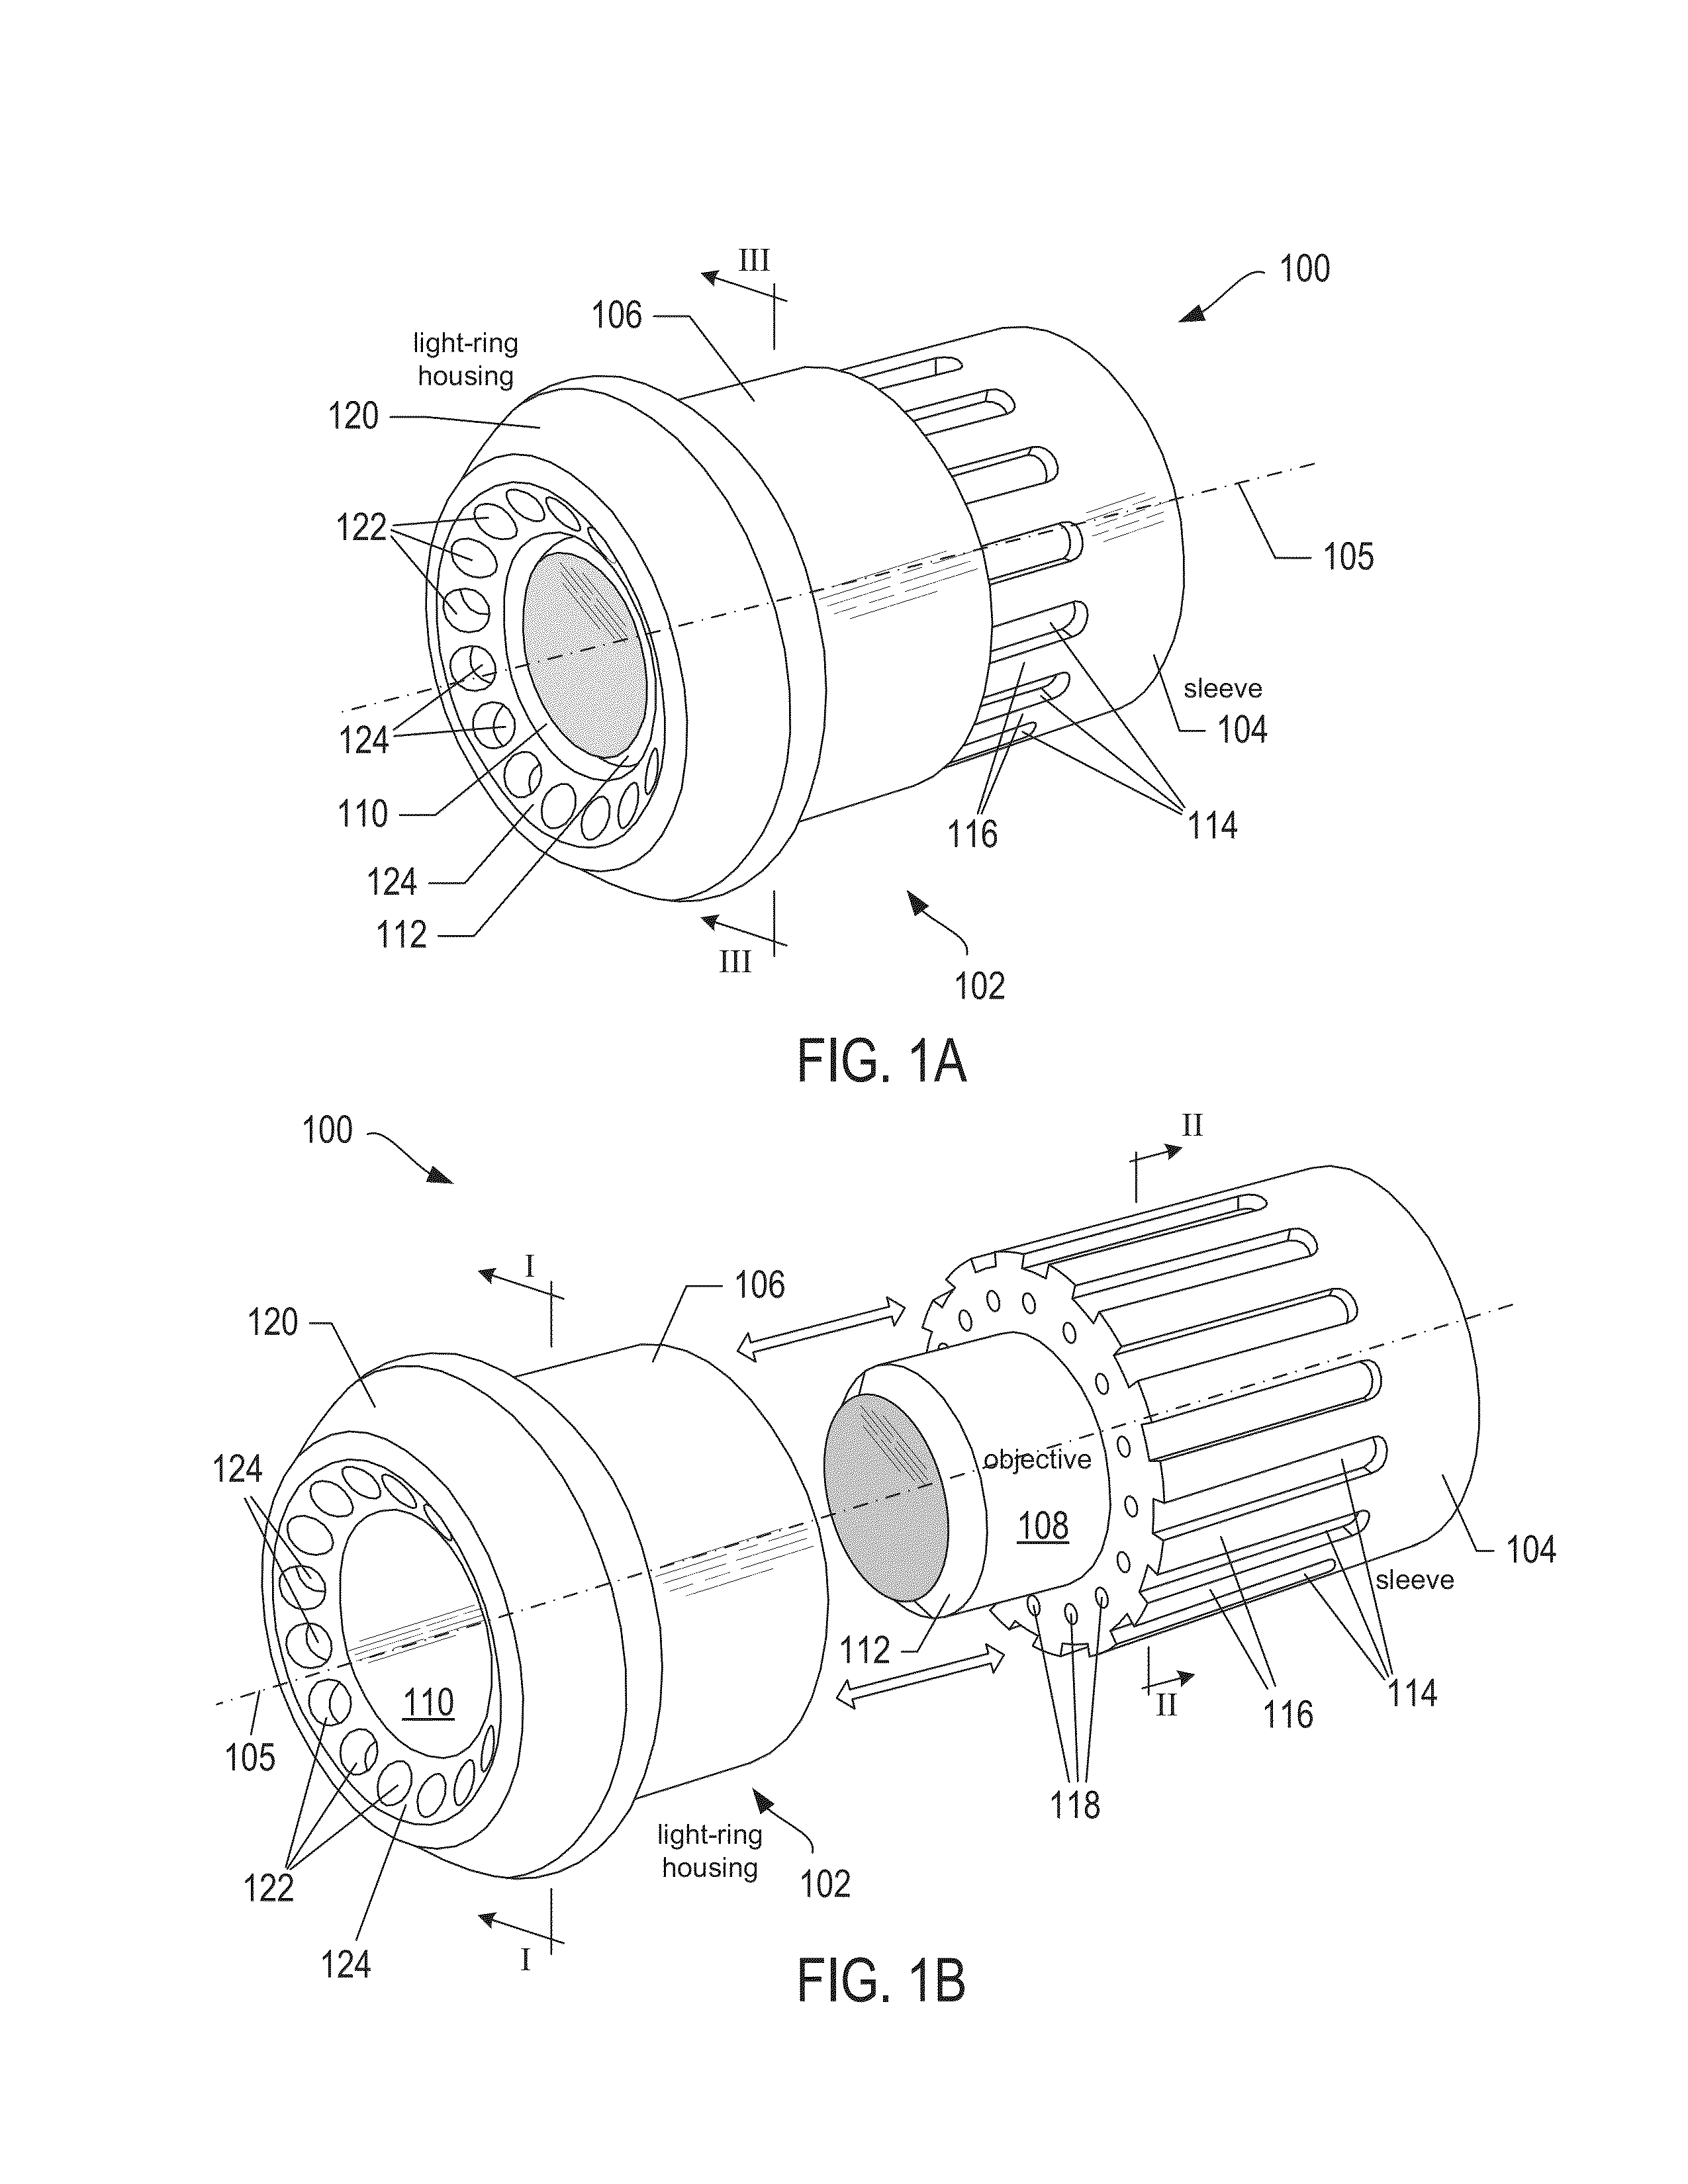 Oblique-illumination systems and methods